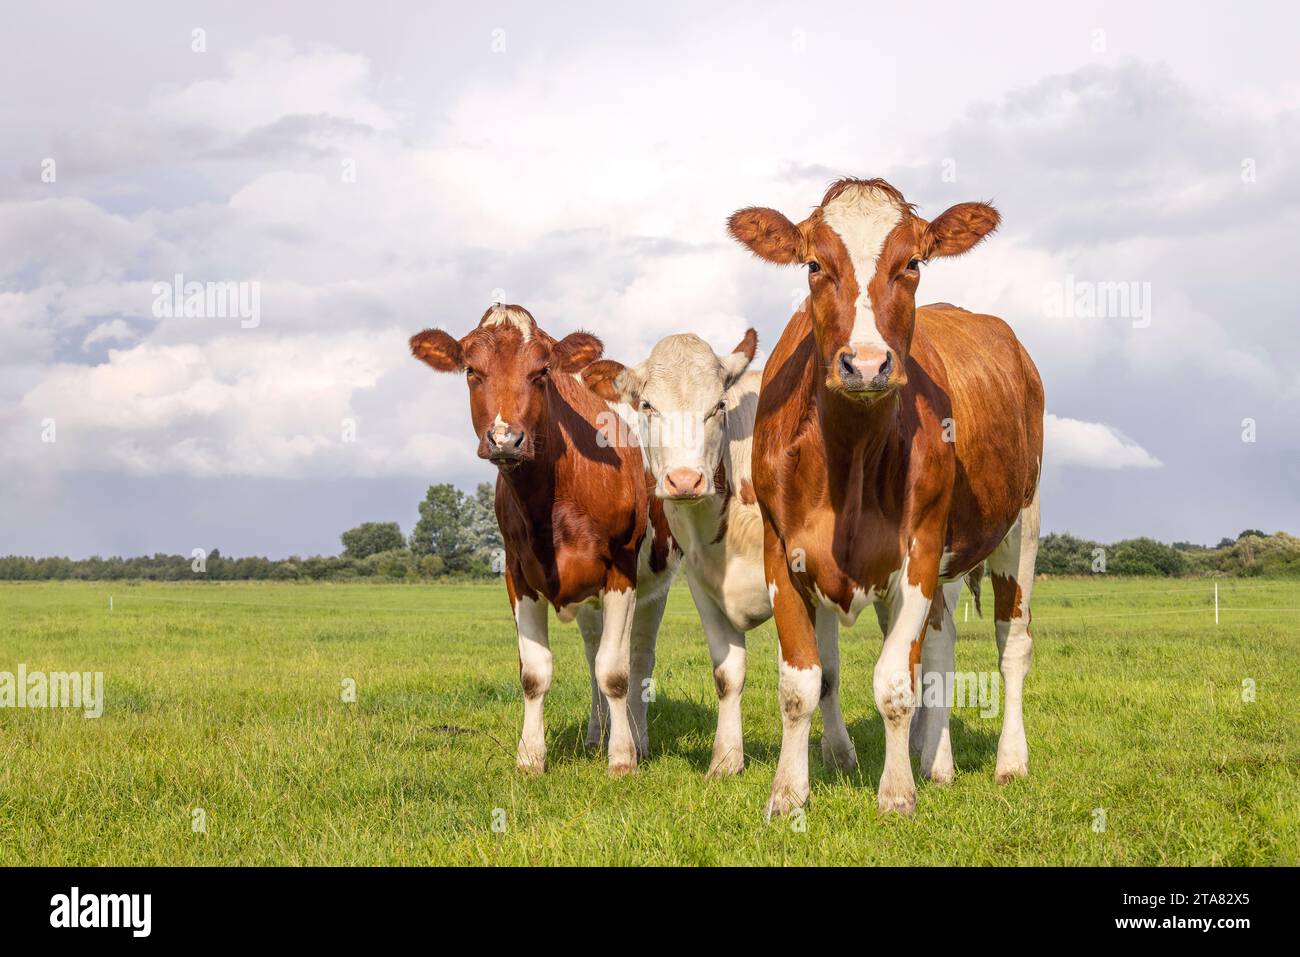 Three young cows, looking curious red and white, in a green field under a blue sky and horizon over land Stock Photo